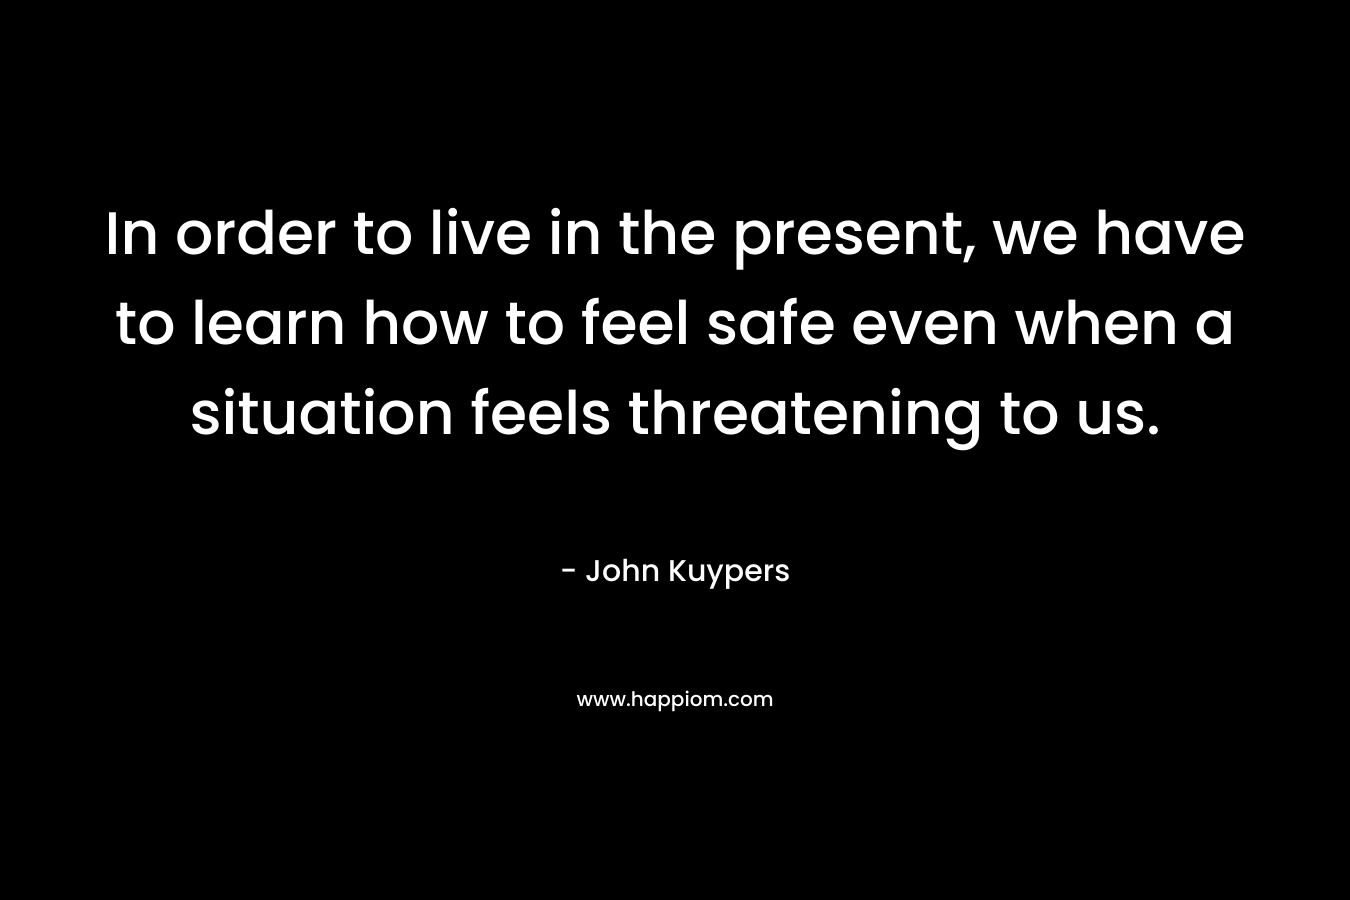 In order to live in the present, we have to learn how to feel safe even when a situation feels threatening to us. – John Kuypers